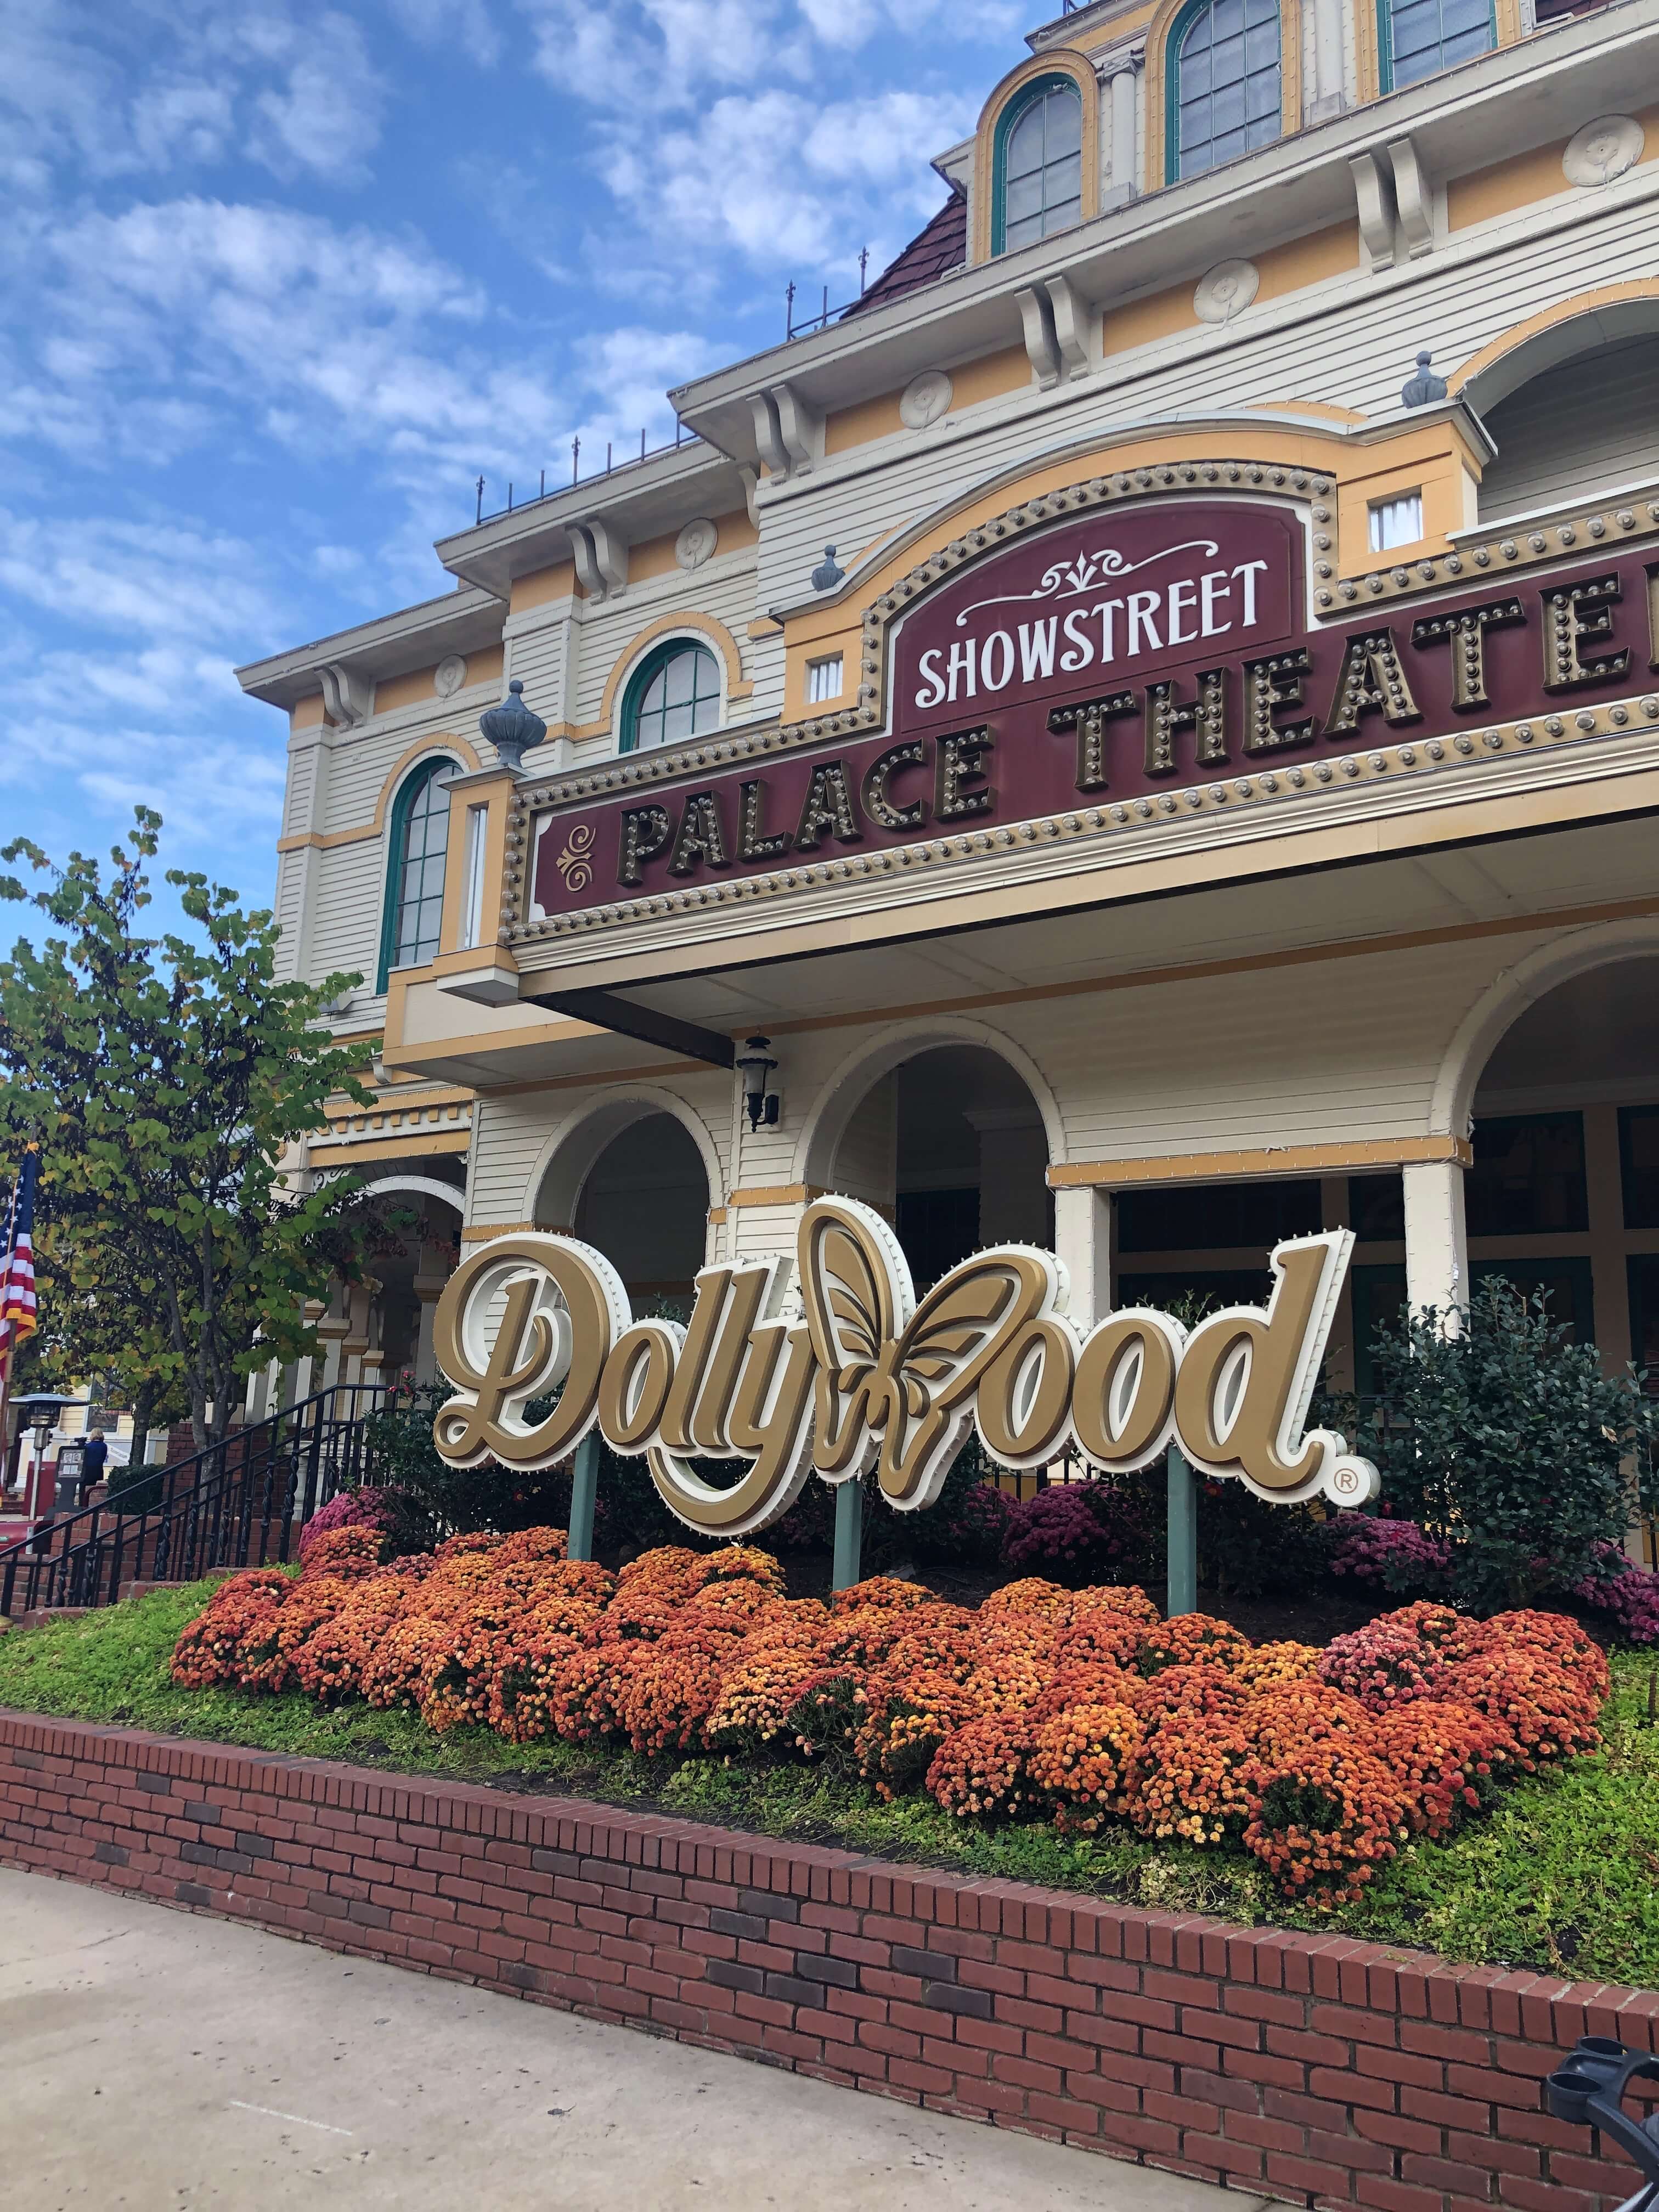 the exterior of the Showstreet Palace Theatre at Dollywood is surrounded by flowers